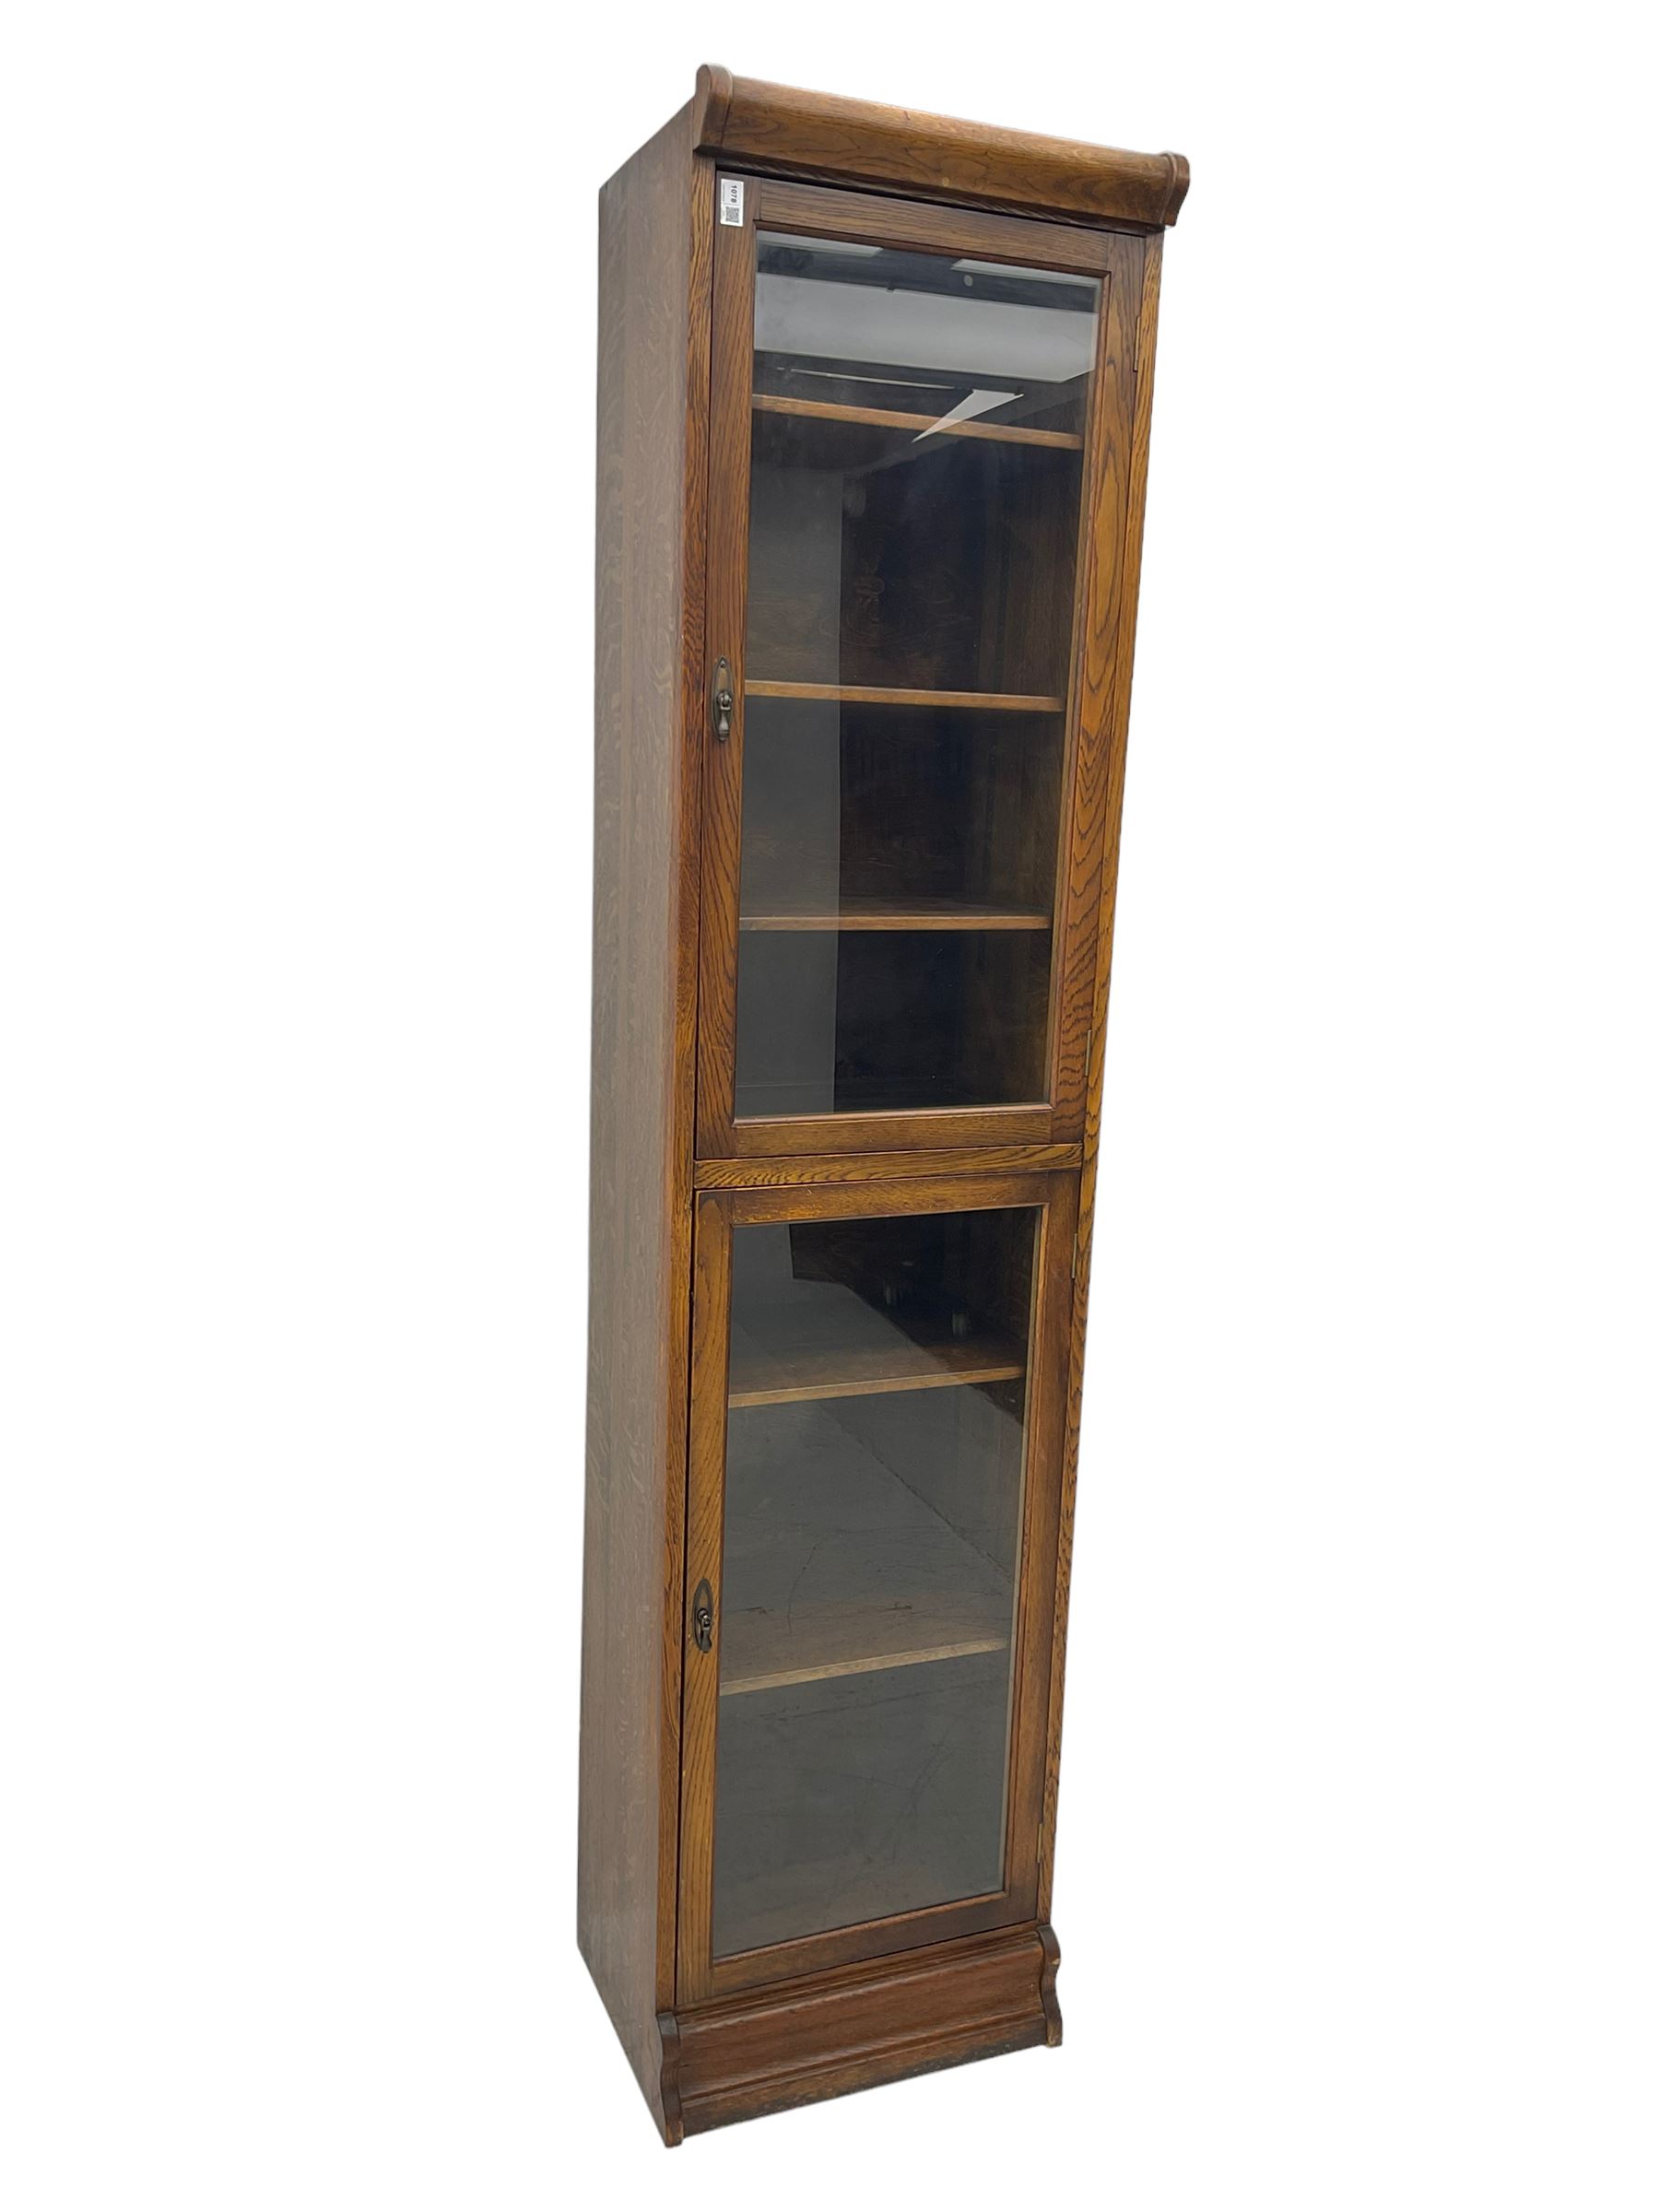 Early 20th century oak library bookcase - Image 4 of 8